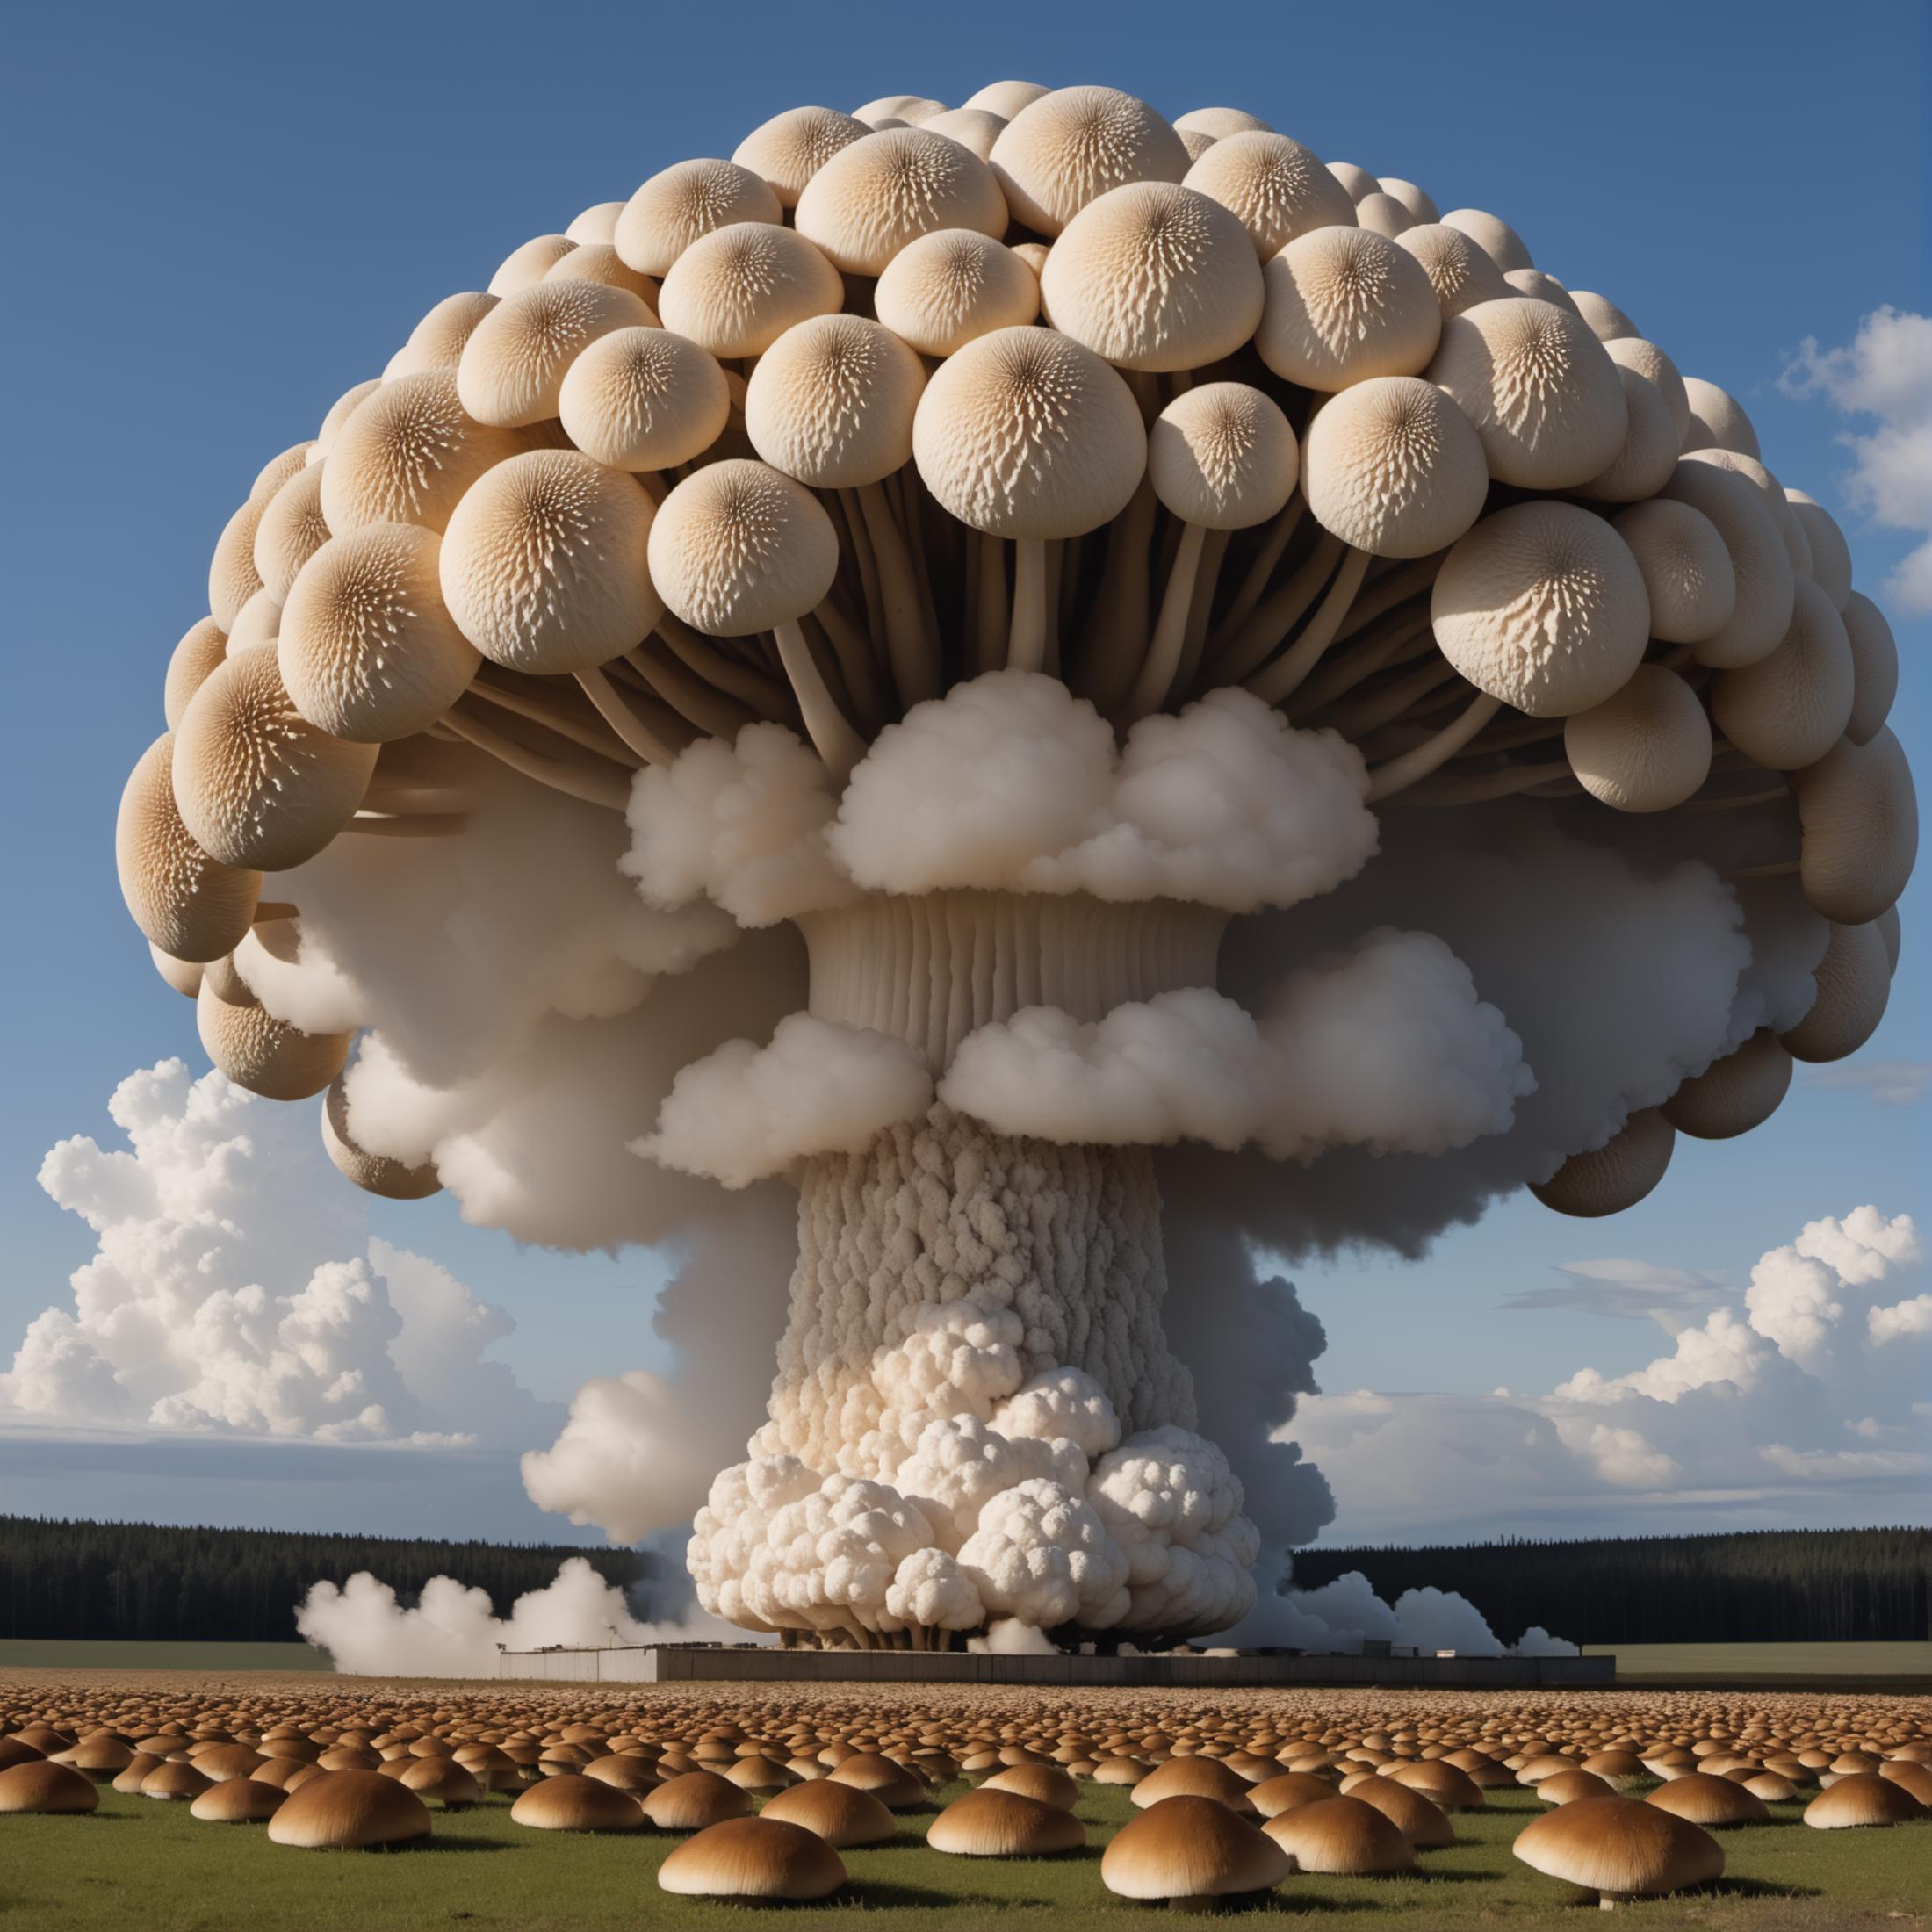 A Mushroom Cloud Explosion Rising from the Ground with Mushrooms Around It